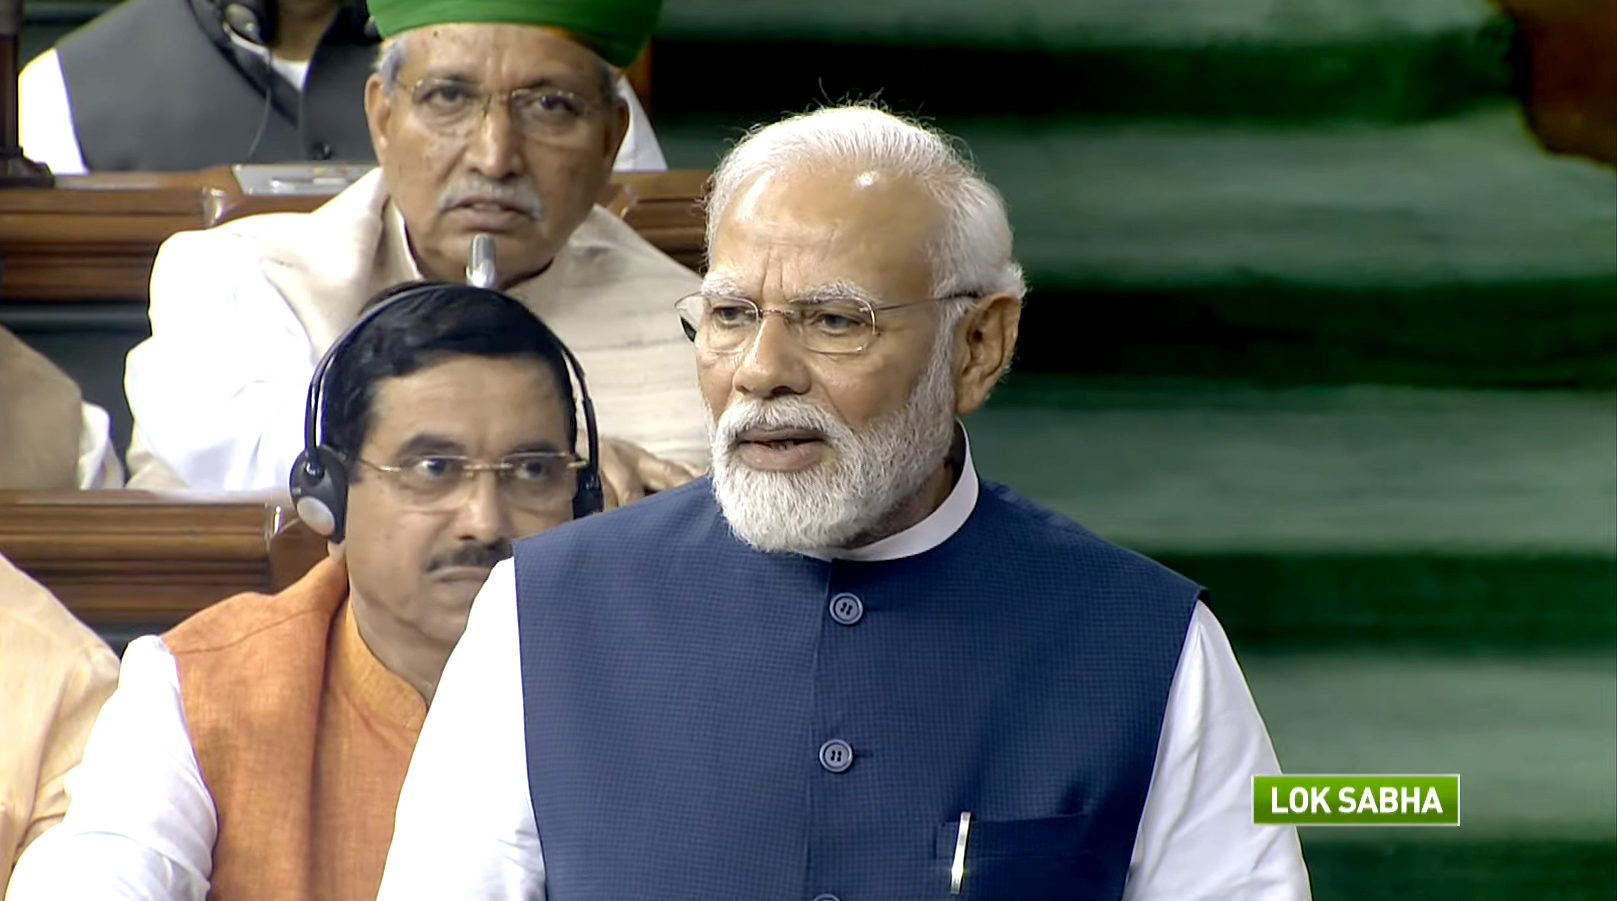 PM Narendra Modi's speech as he answers the no-confidence motion in the Lok Sabha